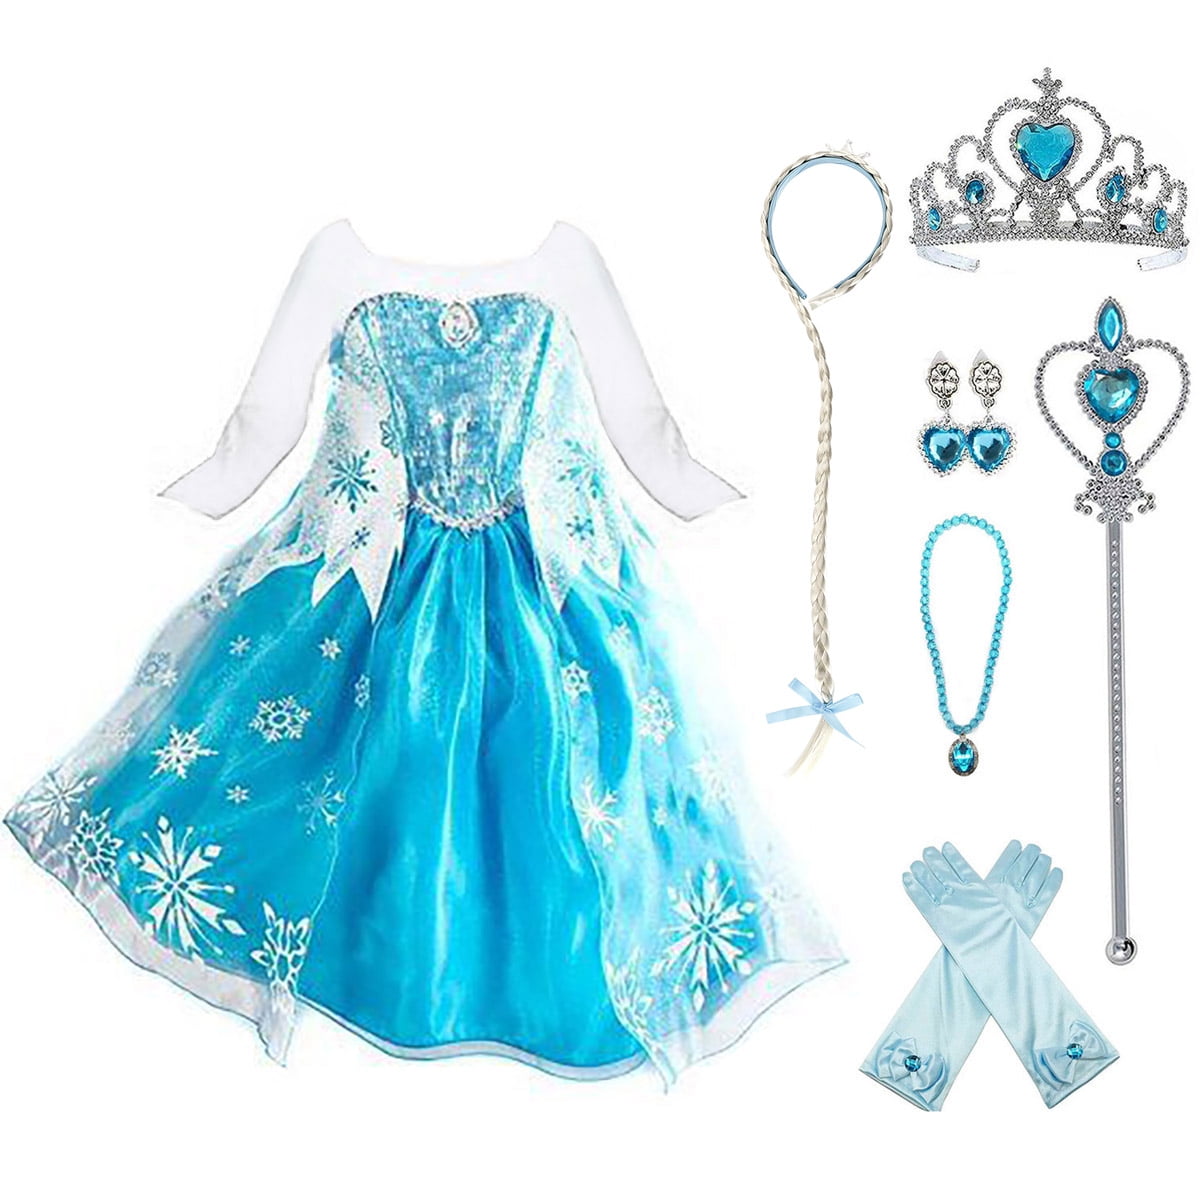 Details about   Princess Dress Up Party Accessories for Princess Costume Gloves Tiara Wand Ne...